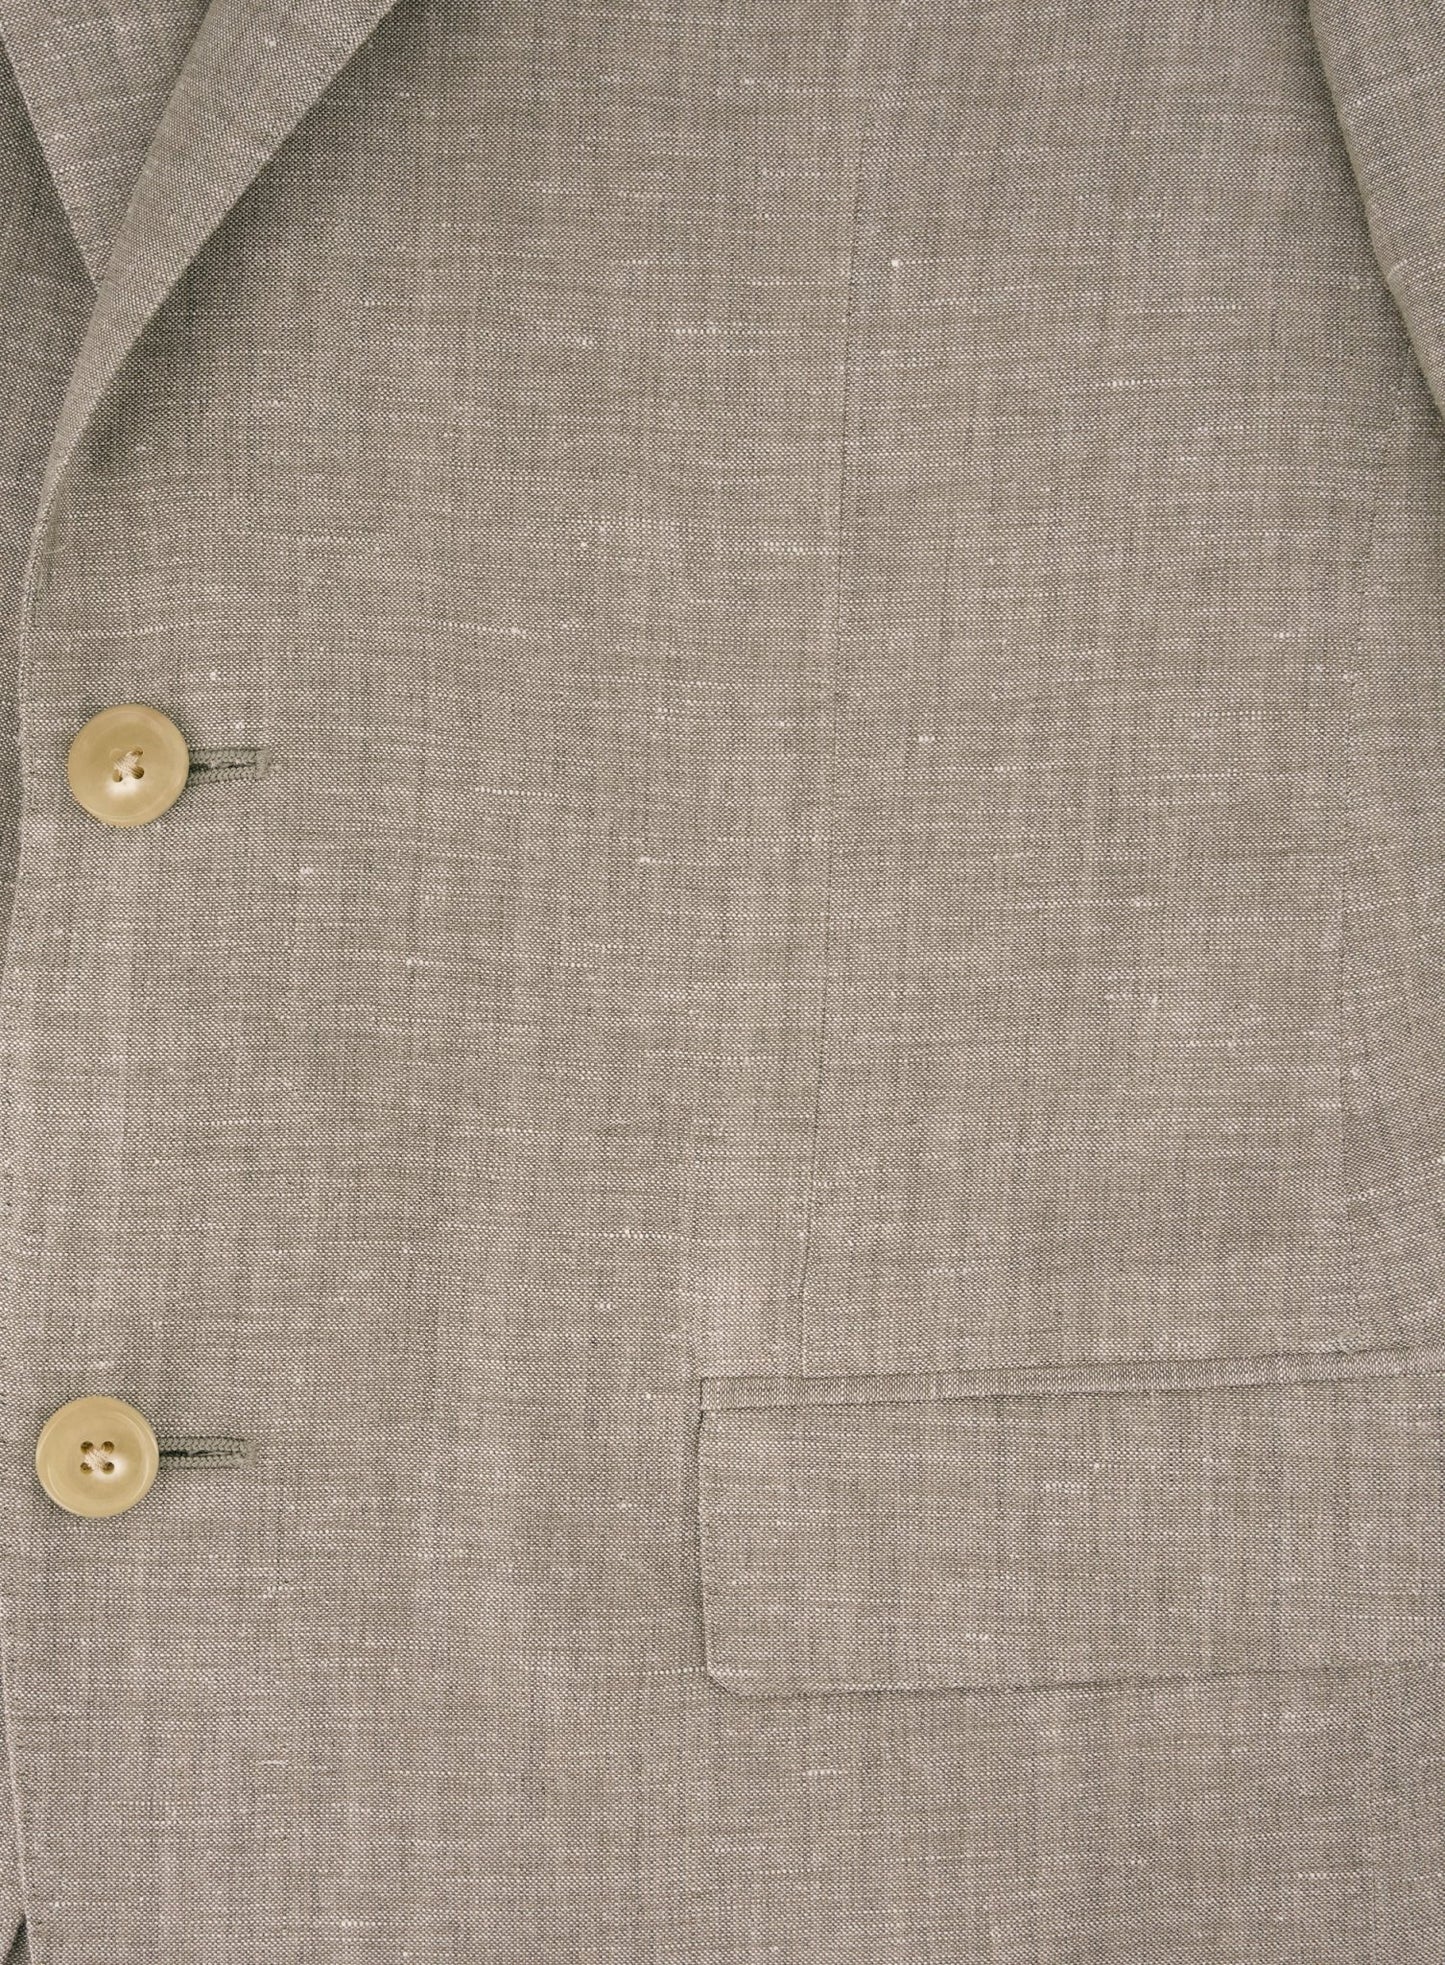 Three-piece suit of wool and linen